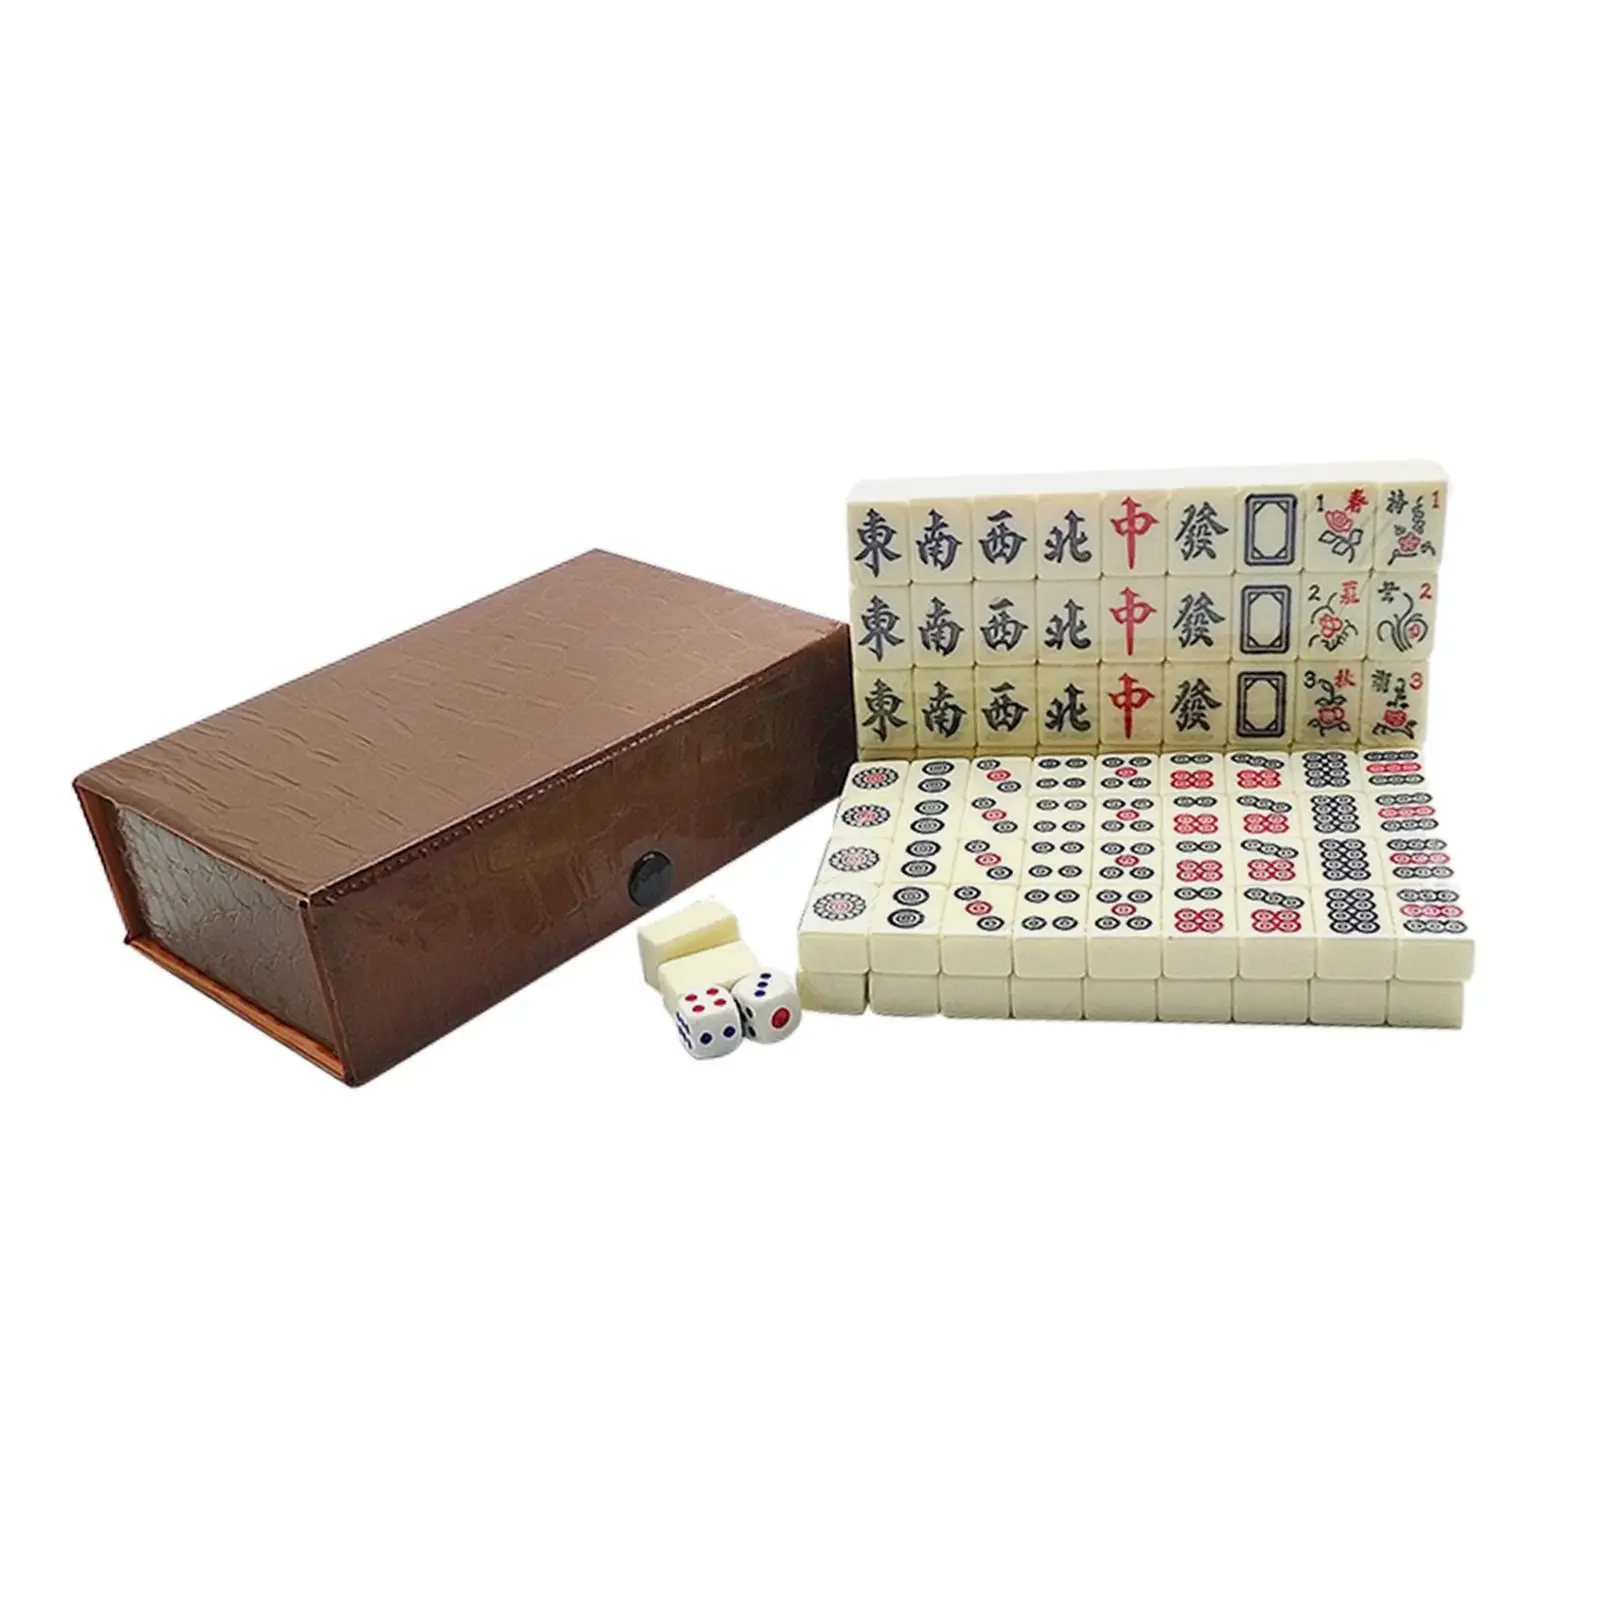 Travel Mahjong Set classic tiles Games with 146 Tiles, for Adults Kids